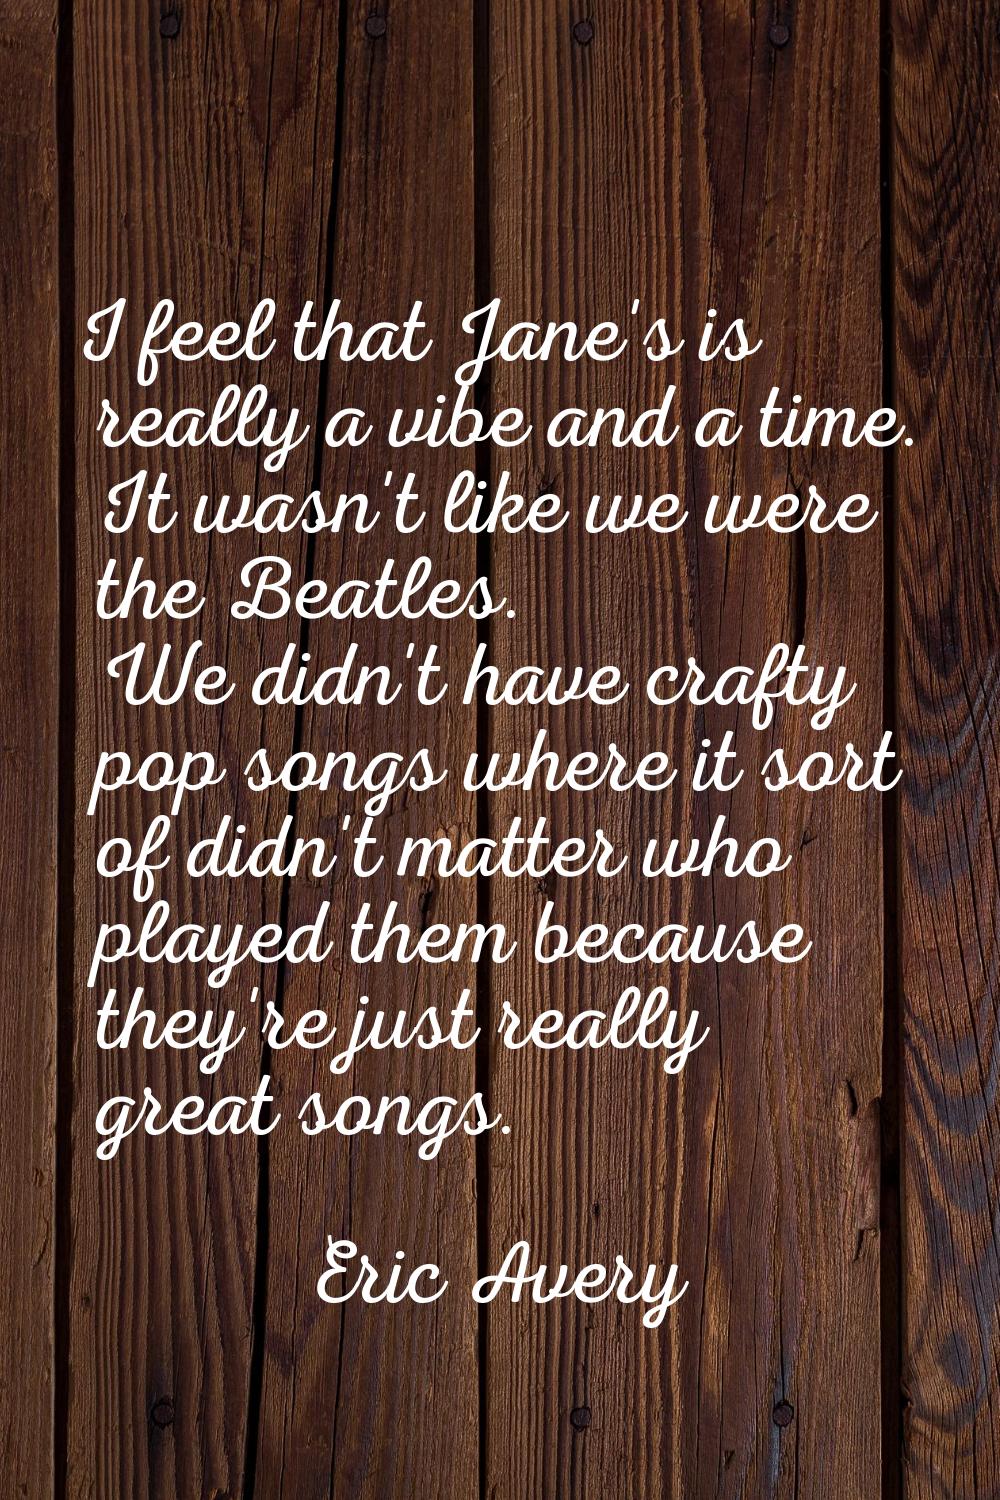 I feel that Jane's is really a vibe and a time. It wasn't like we were the Beatles. We didn't have 